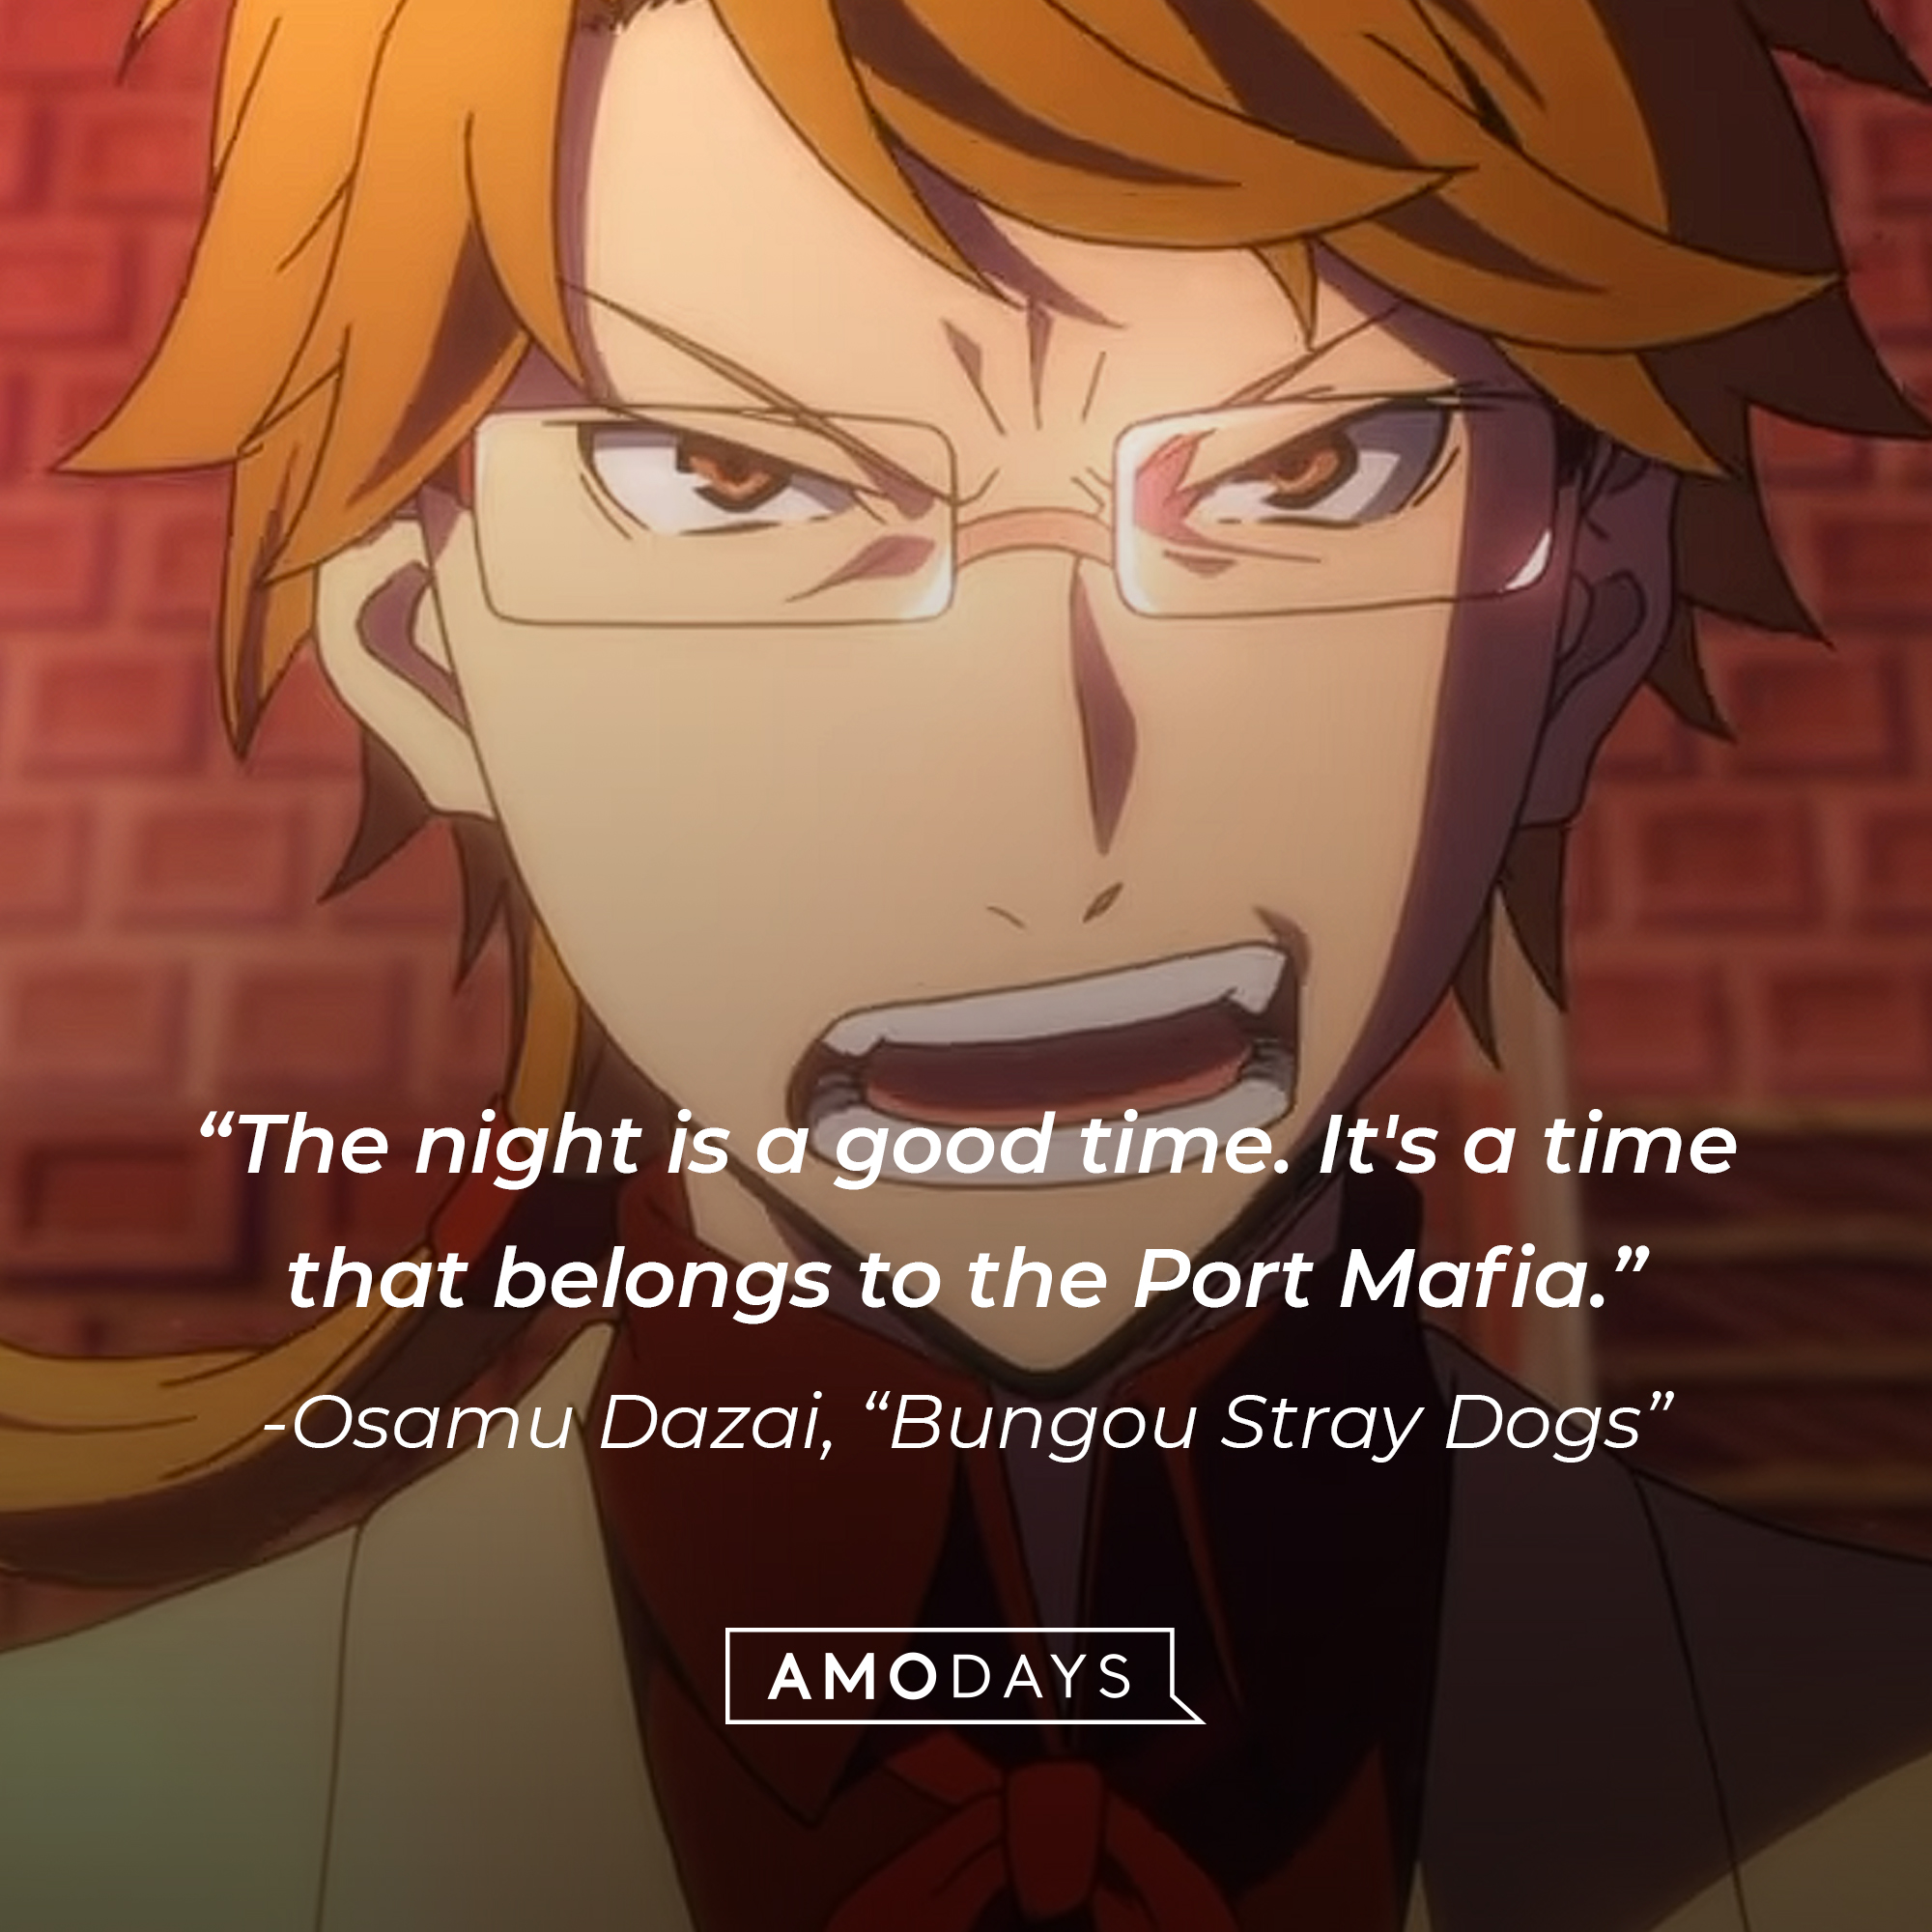 Osamu Dazai's quote: "The night is a good time. It's a time that belongs to the Port Mafia.” | Image: youtube.com/Crunchyroll Collection